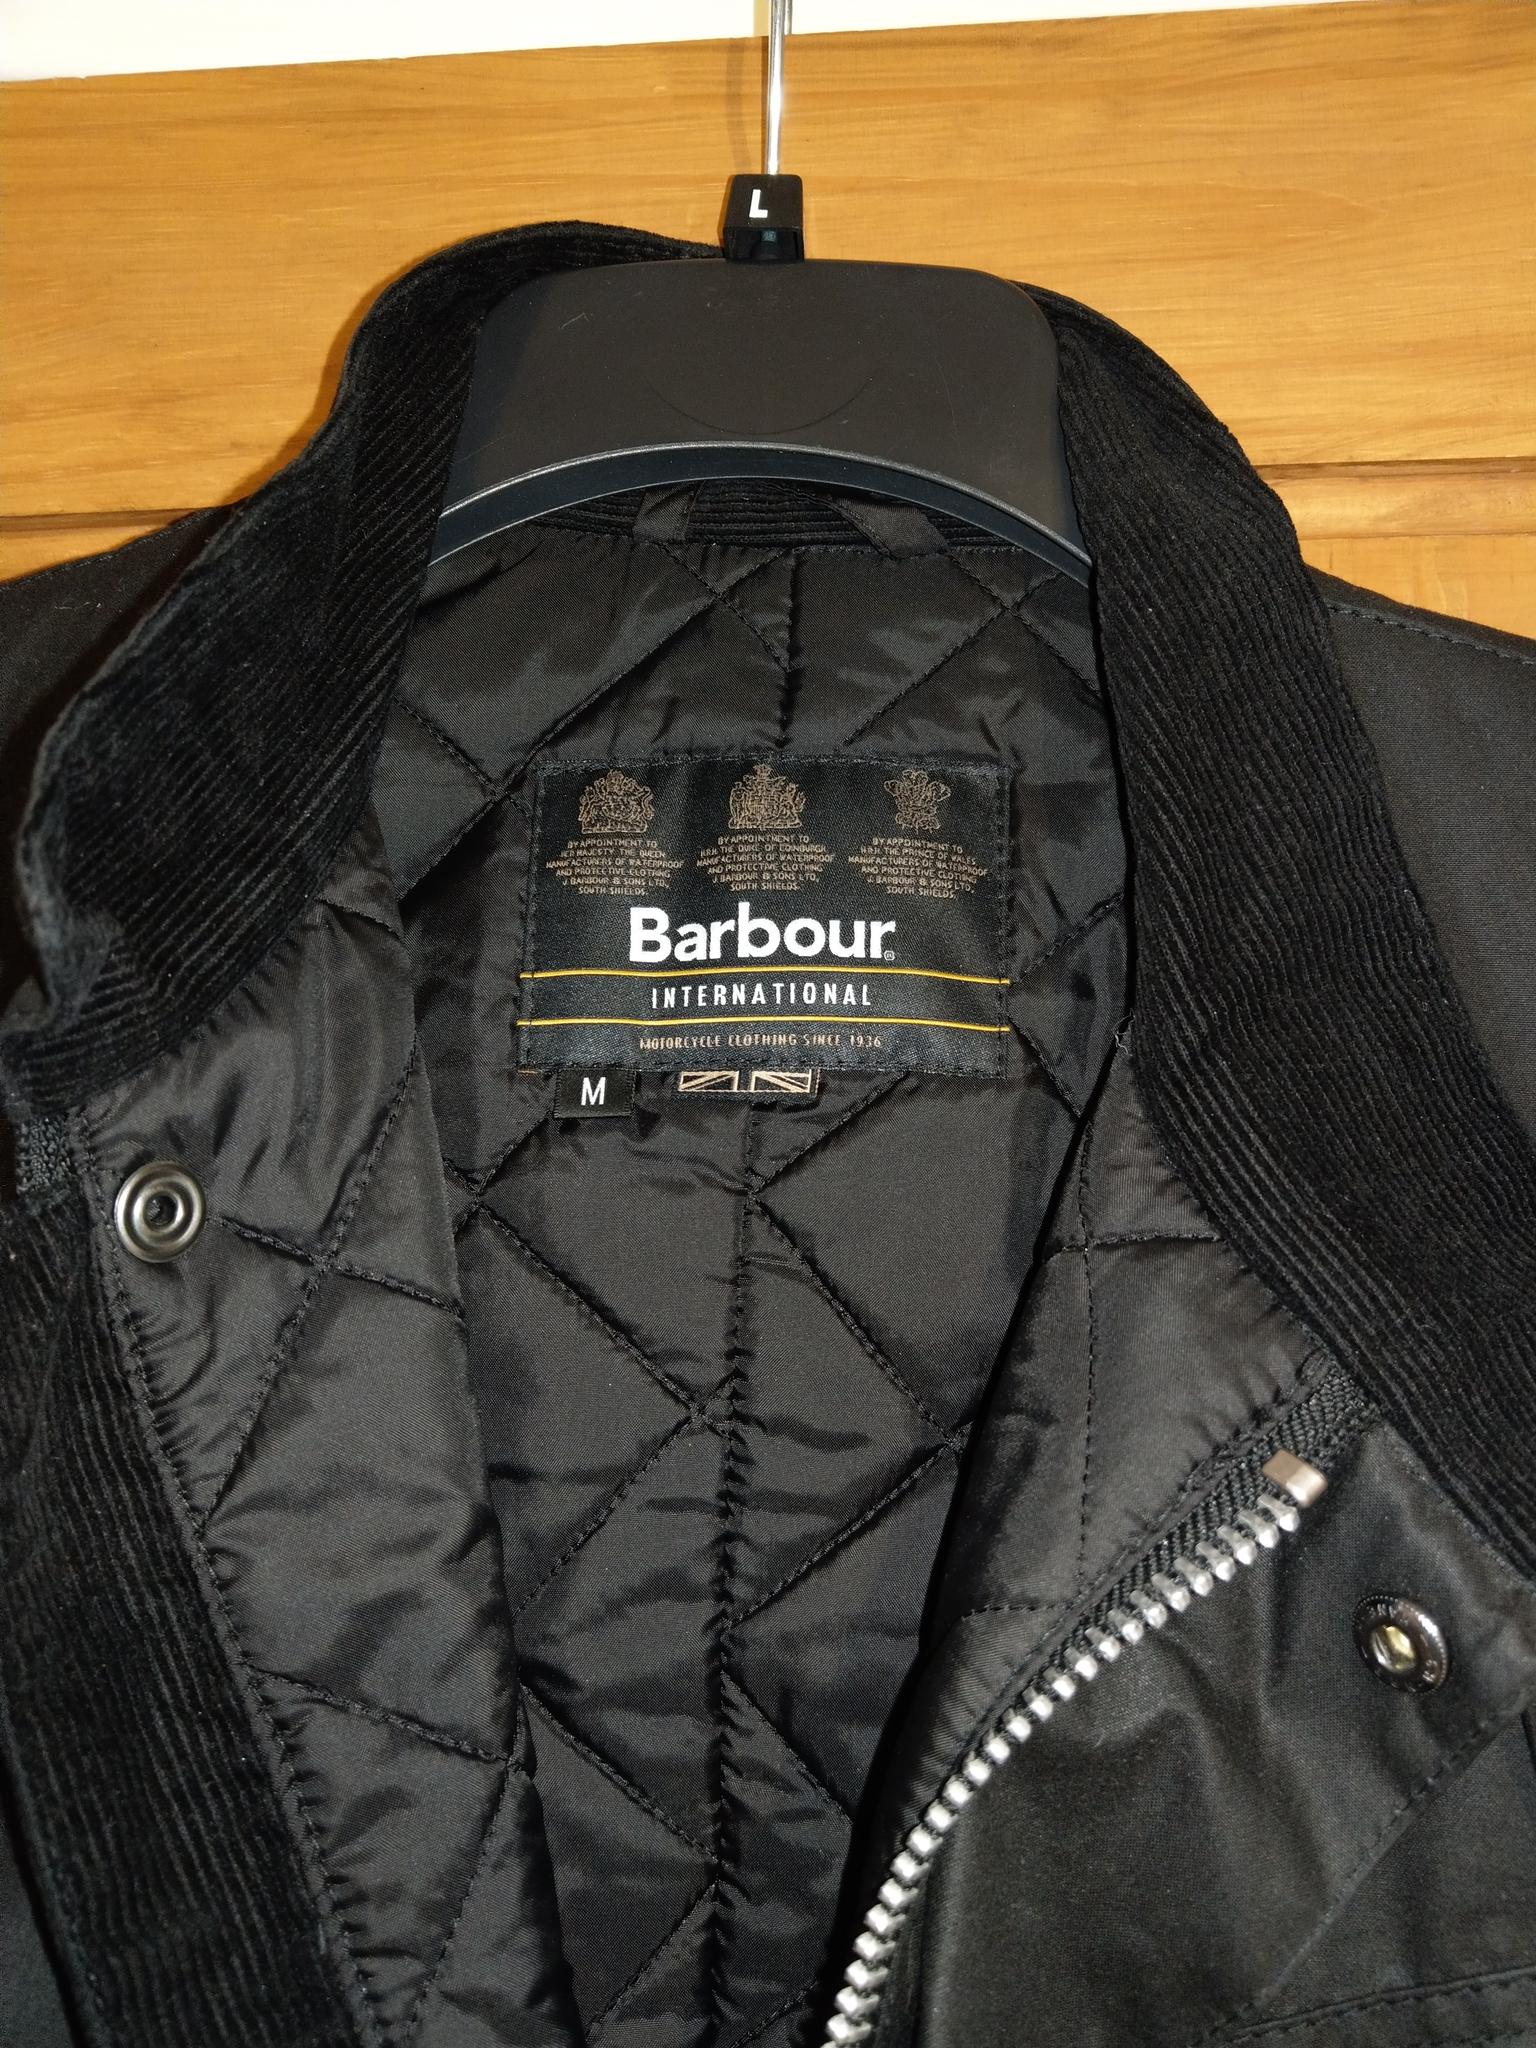 house of fraser barbour jackets ladies